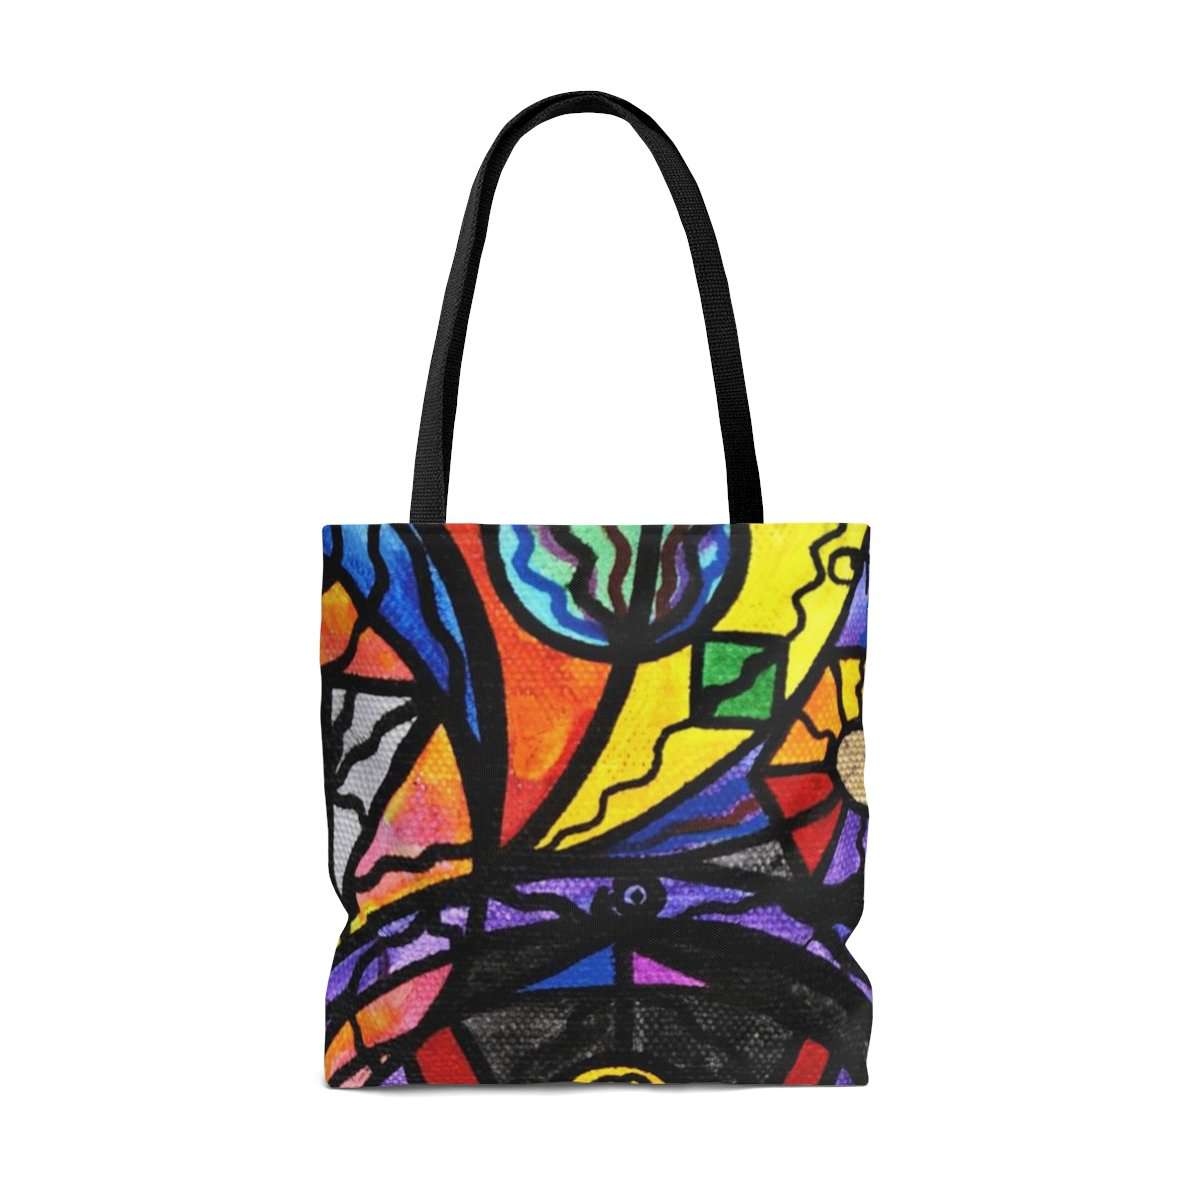 find-the-newest-alchemy-aop-tote-bag-online-hot-sale_1.jpg